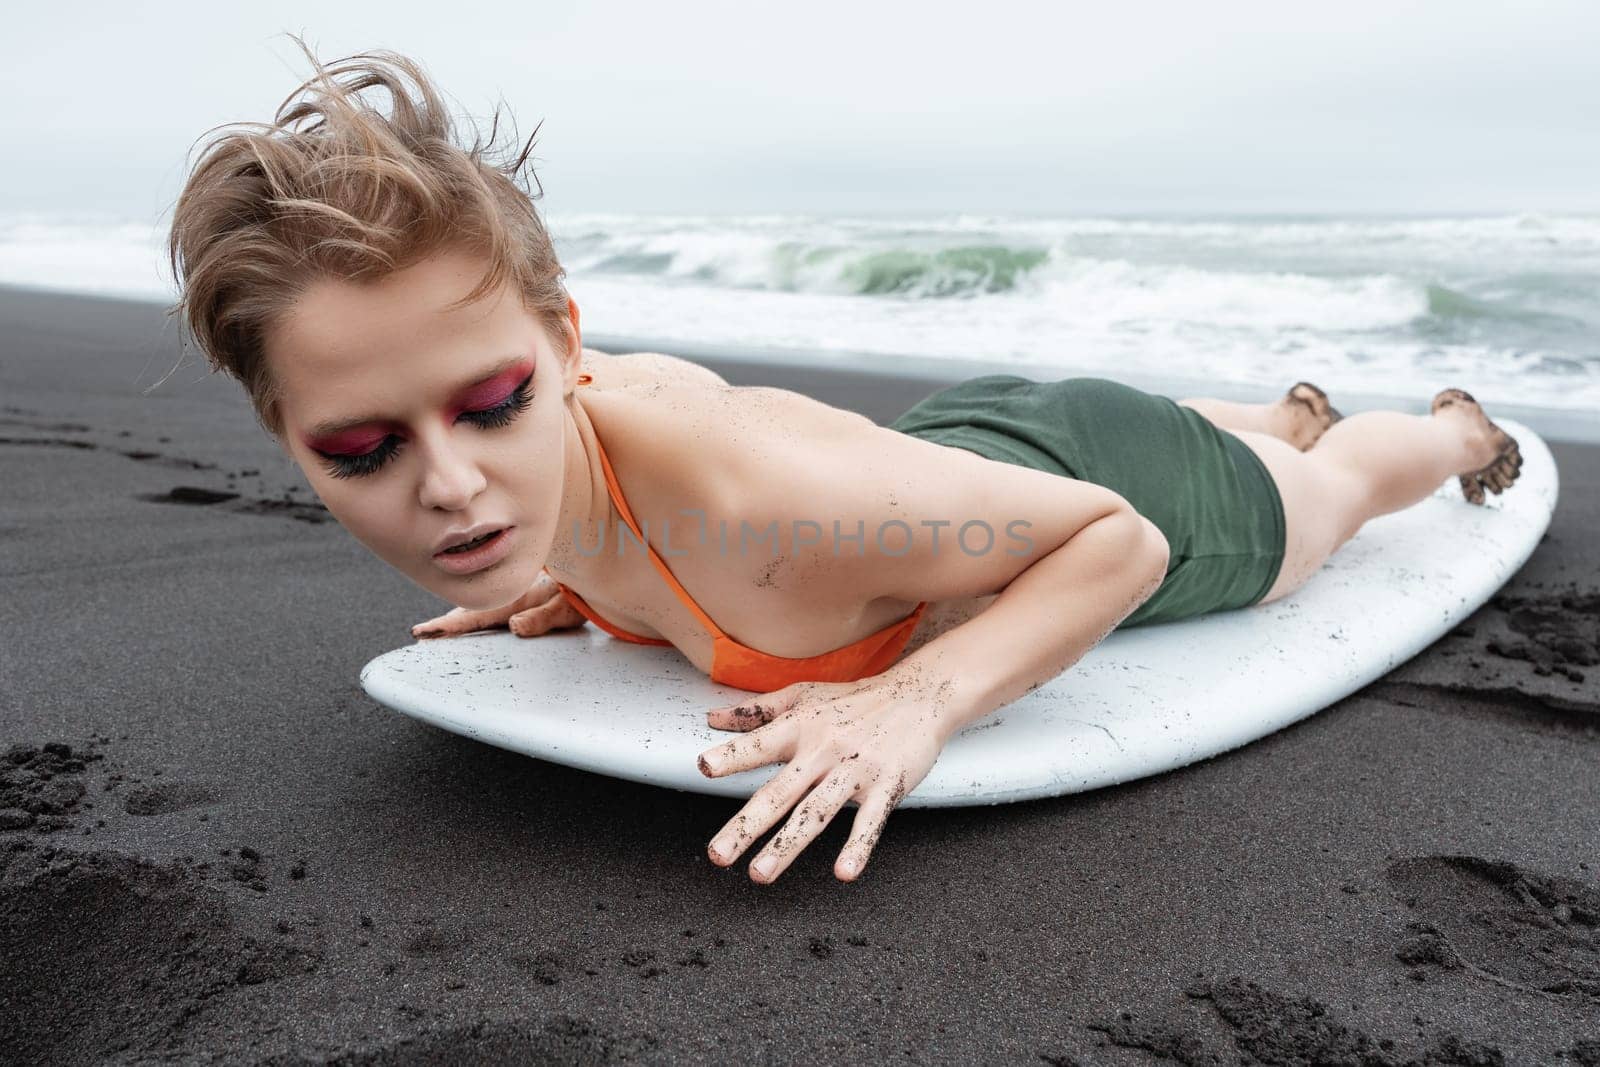 Blonde surfer woman with bright makeup looks stunning as she lies on front of surfboard on sandy beach. With her eyes closed, surfer is fully immersed in moment, feeling rush of sea and warmth of sun